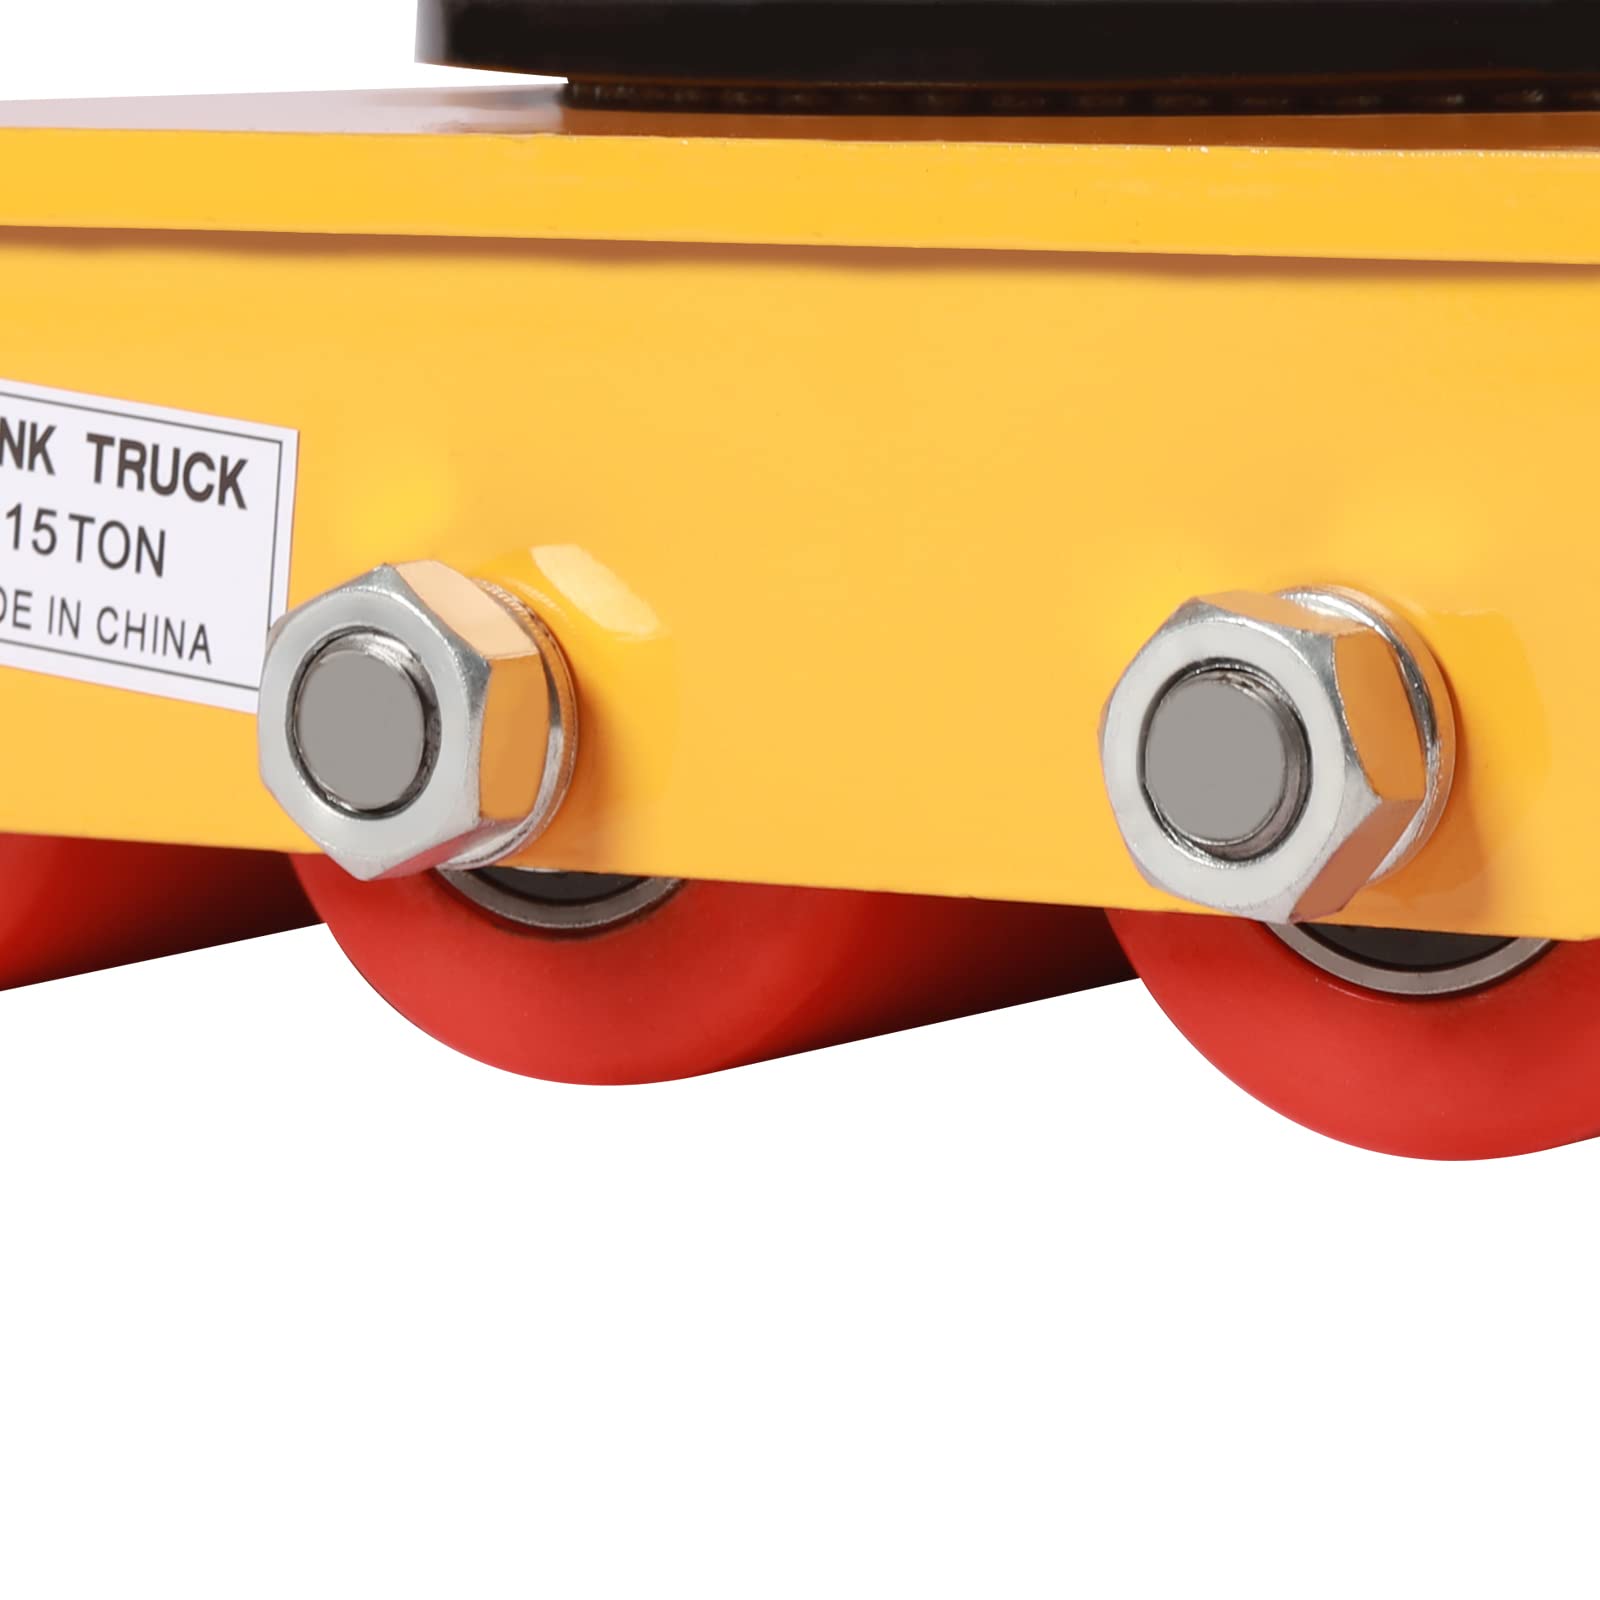 Machine Skates, 15T Machinery Skate Dolly, 33000lbs Machinery Moving Skate, Machinery Mover Skate, Heavy Duty Machine Dolly Skate for Industrial Moving Equipment, Yellow, 1pc